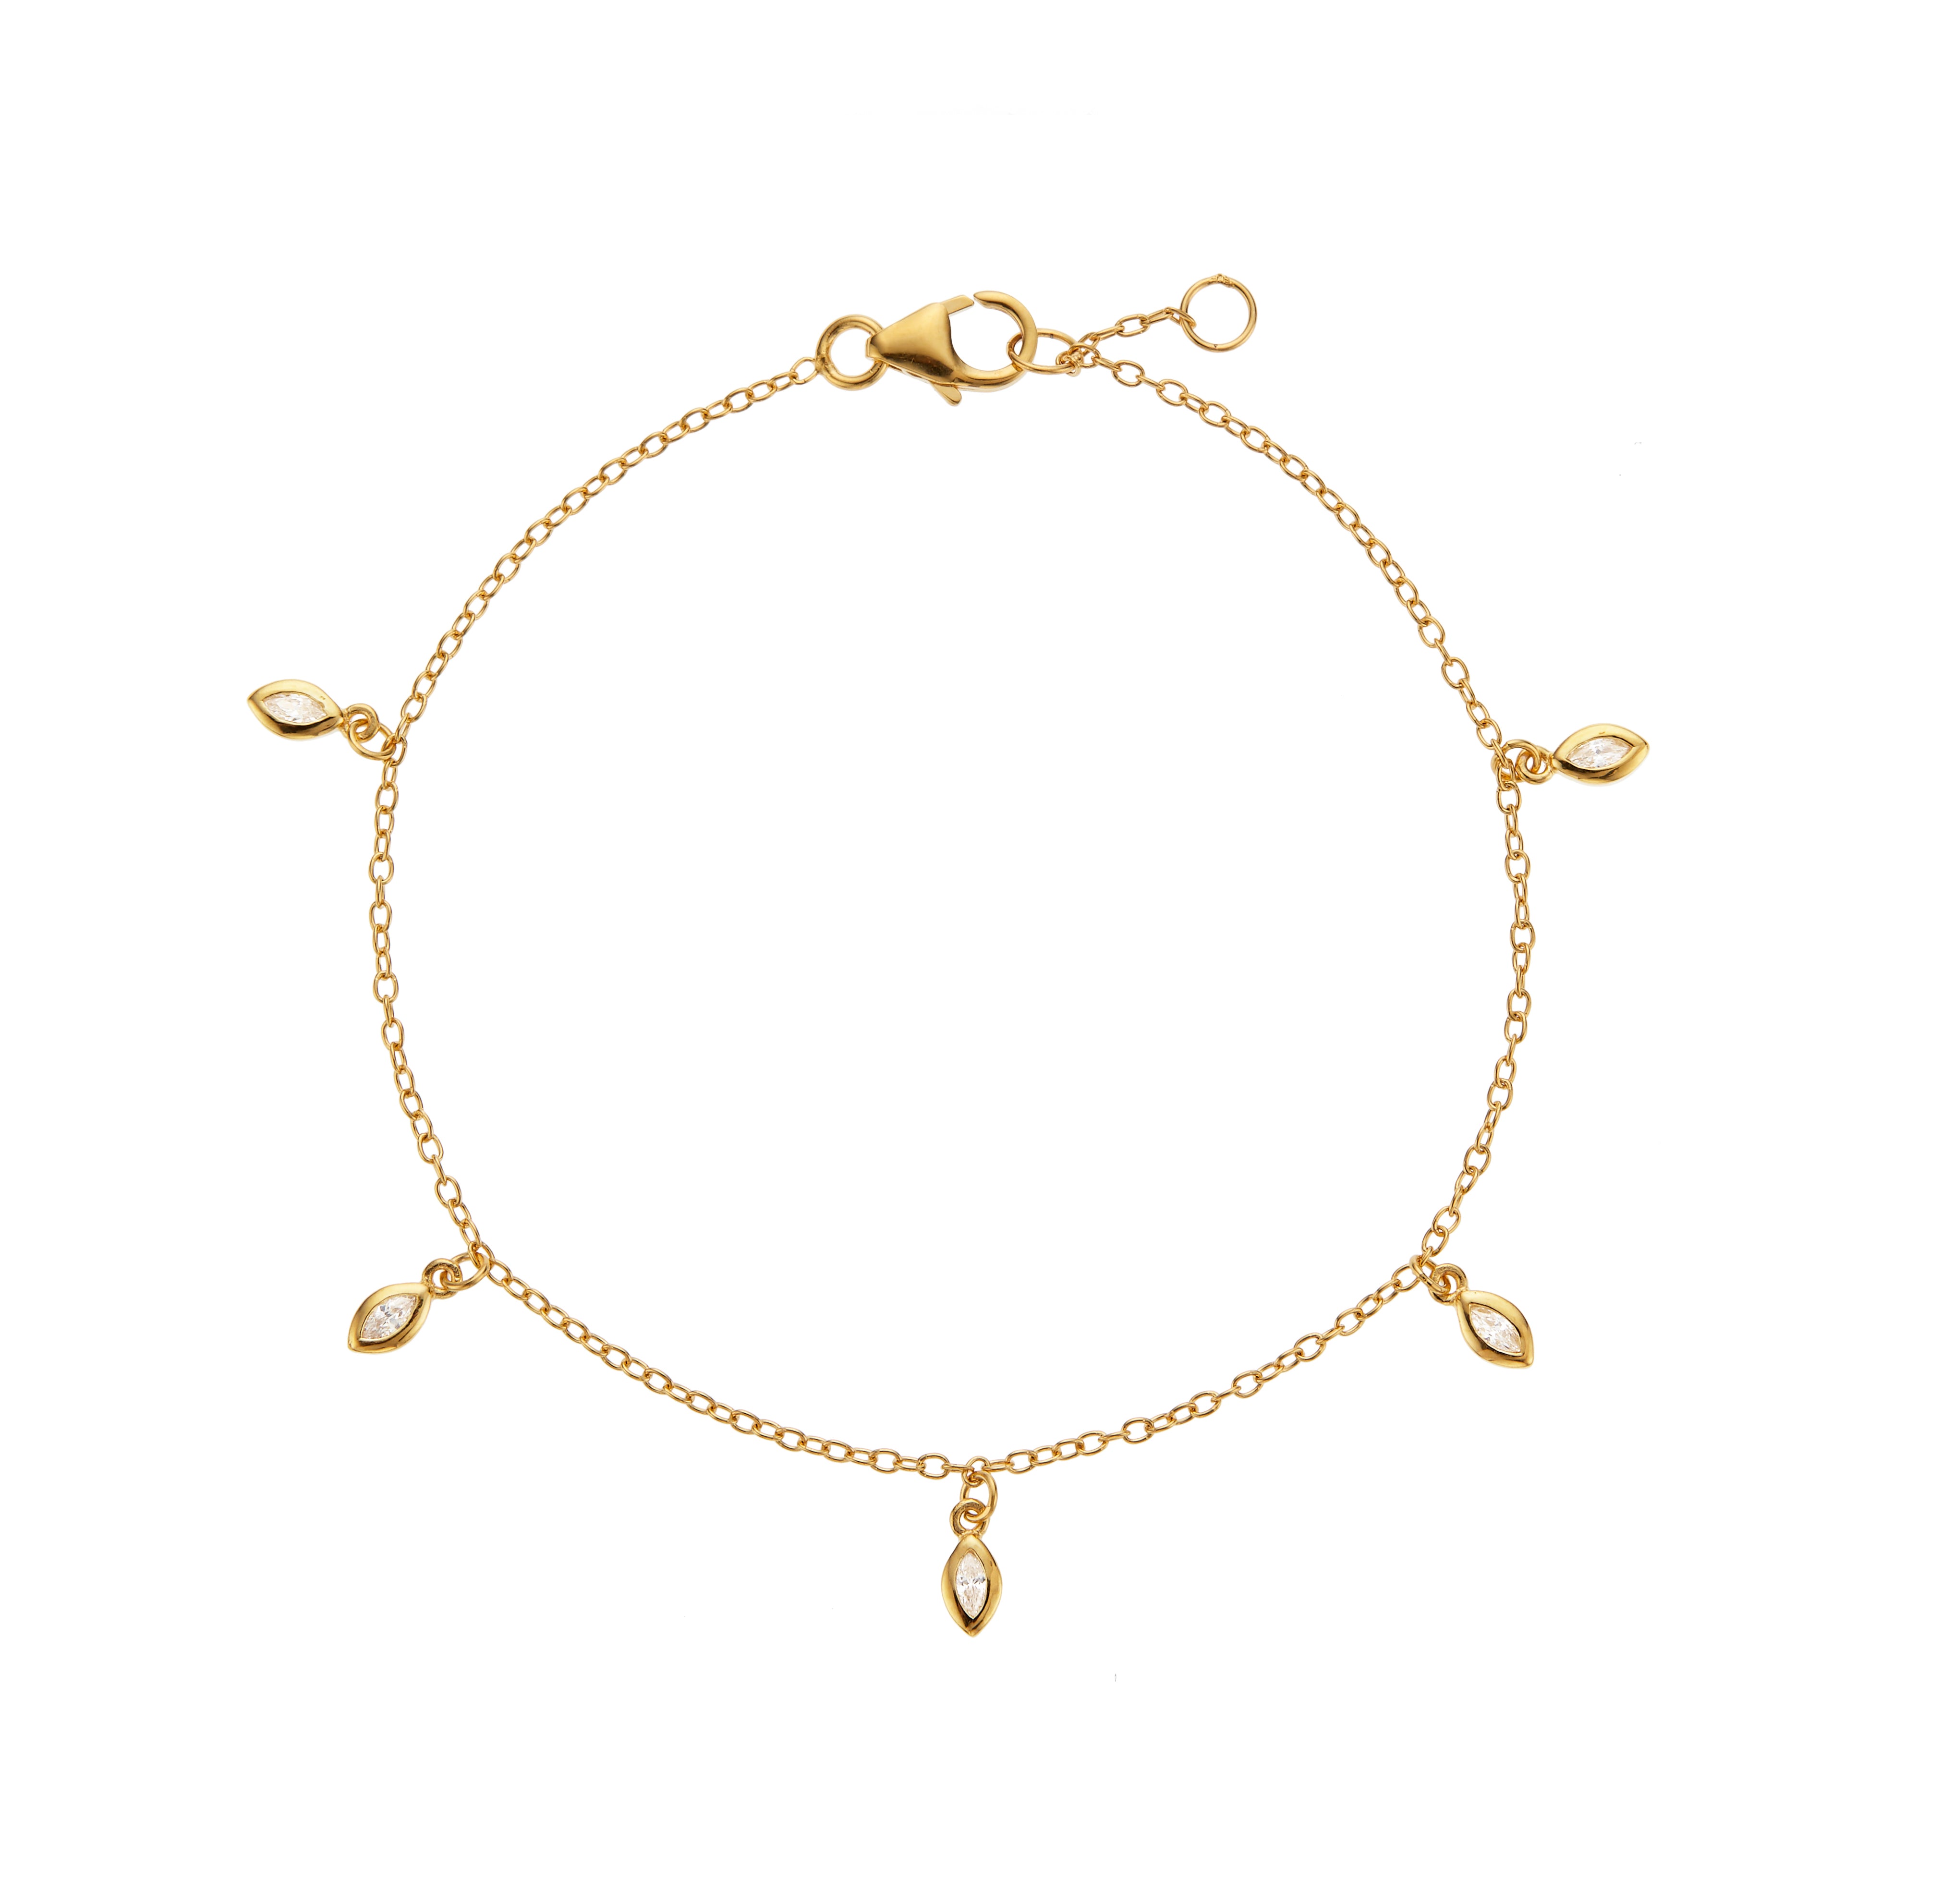 Gold diamond style marquise drop bracelet on a white background